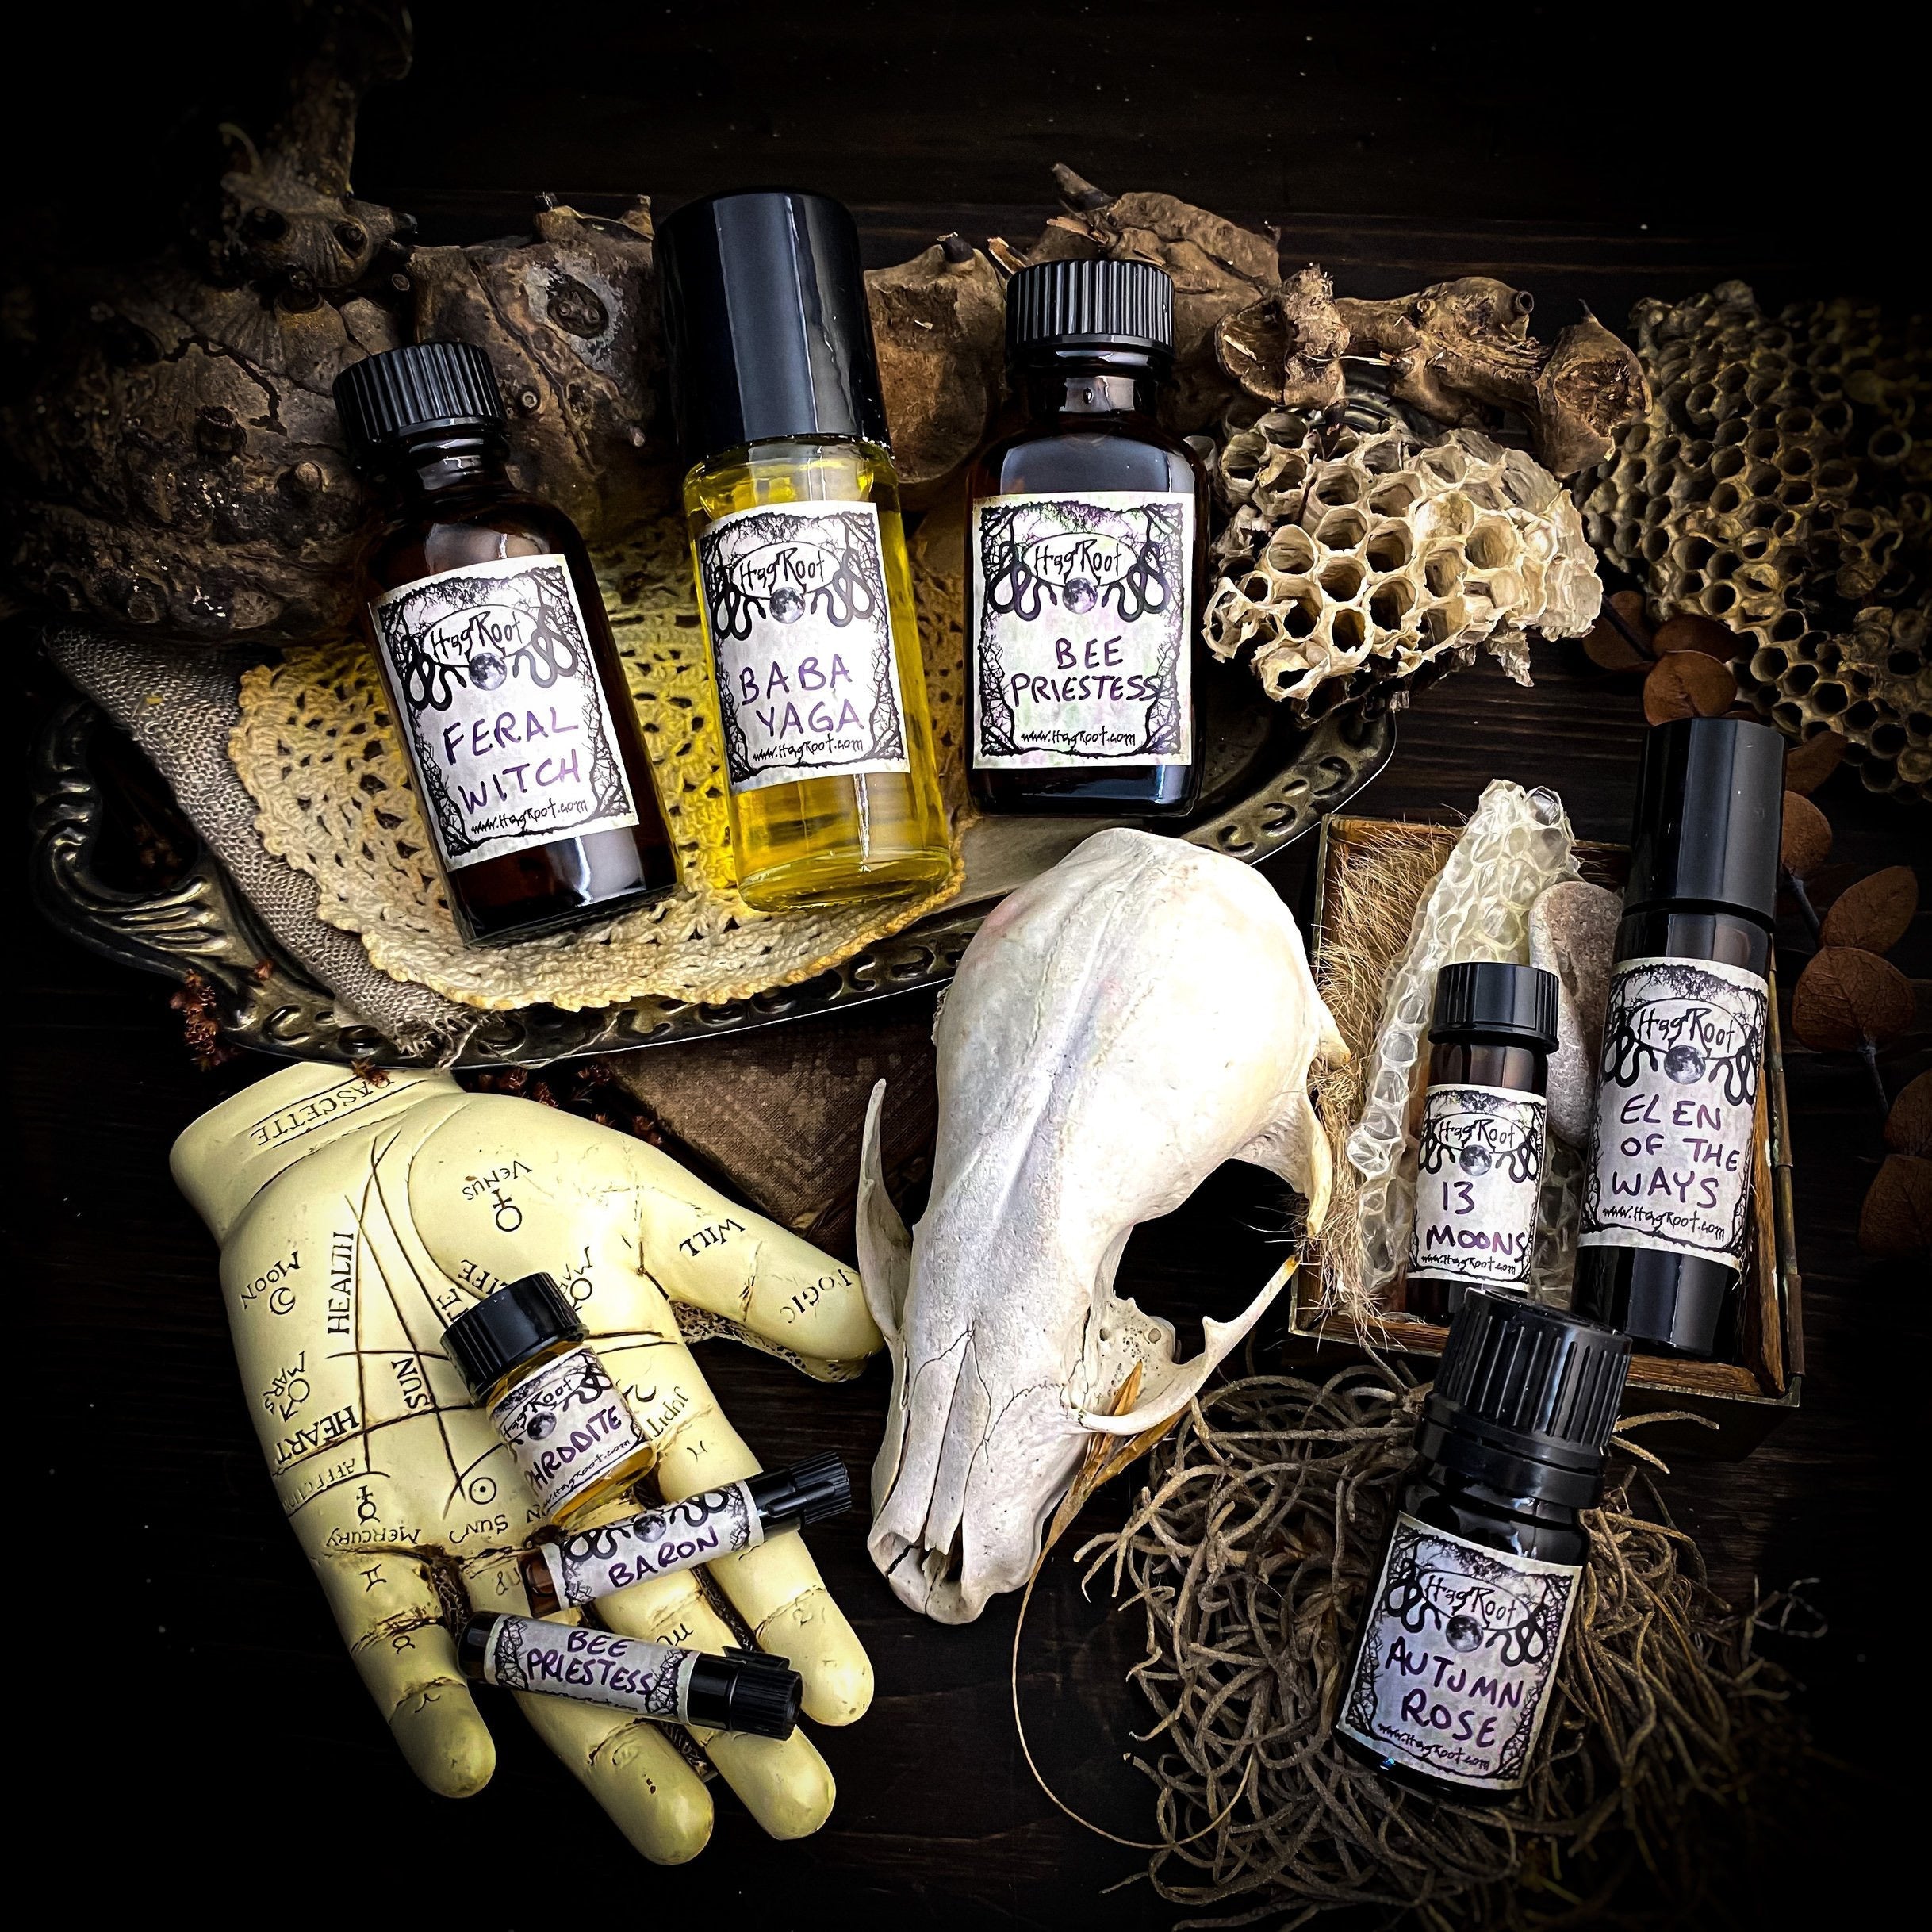 HAUNTED ORCHARD-(Apples, Peaches, Blackberries, Cinnamon, Charred Wood)-Perfume, Cologne, Anointing, Ritual Oil